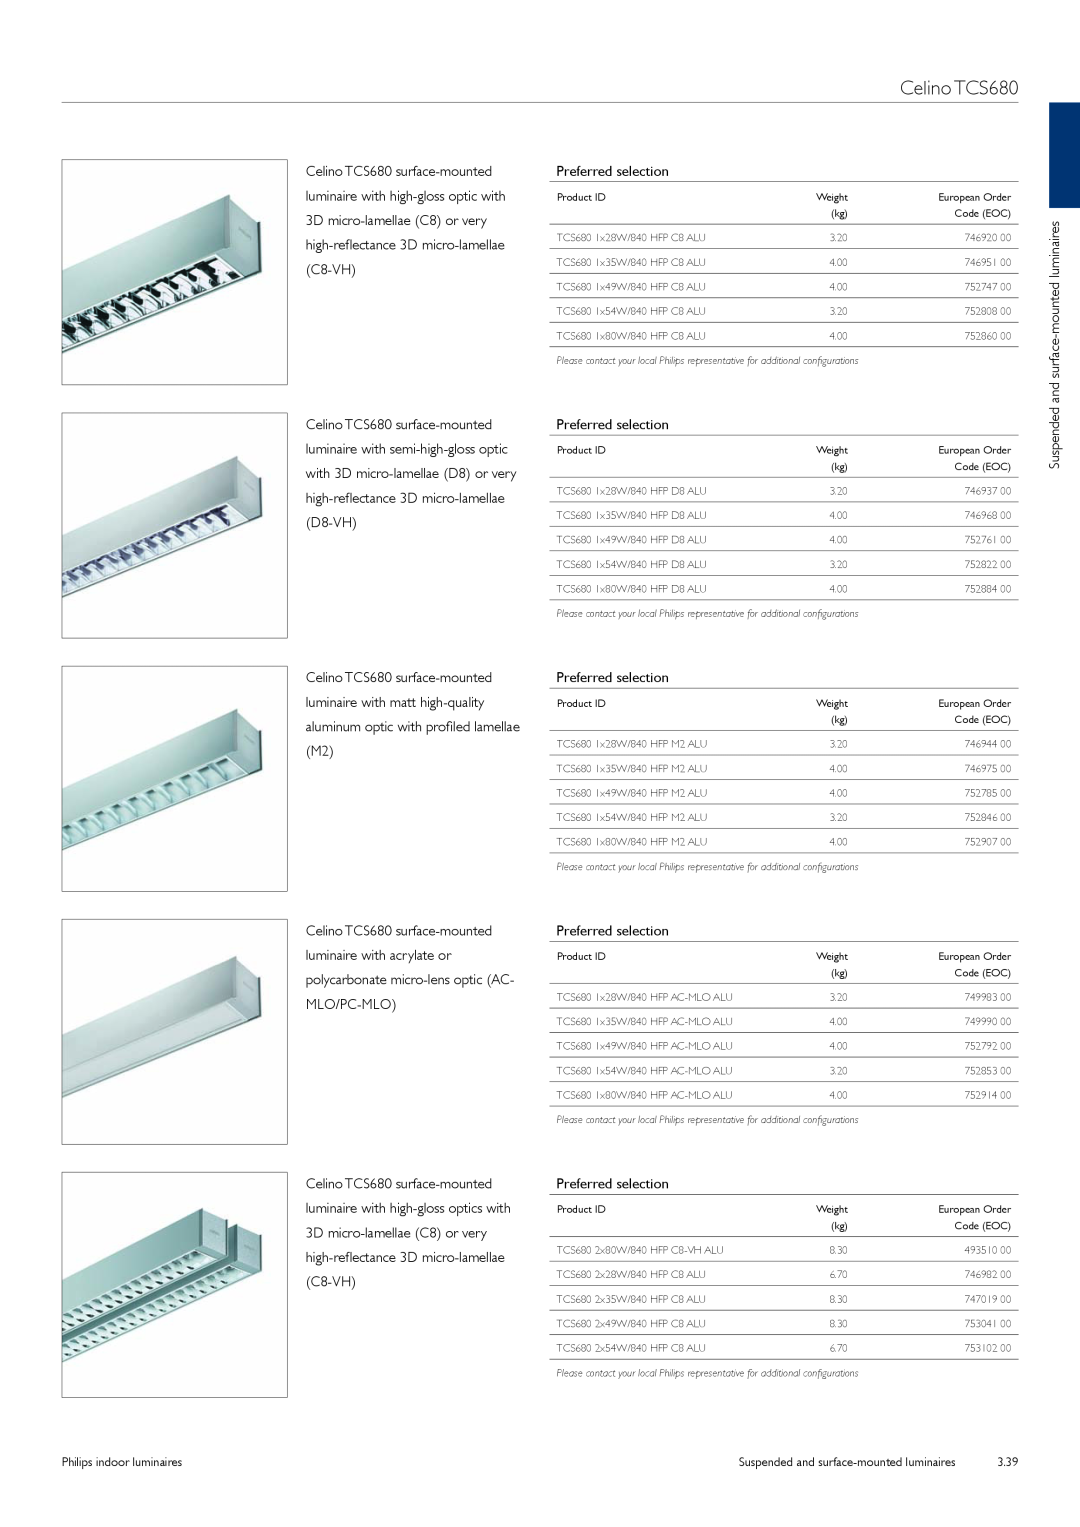 Philips TCS125 Celino TCS680, Preferred selection, Suspended and surface-mountedluminaires, Philips indoor luminaires 